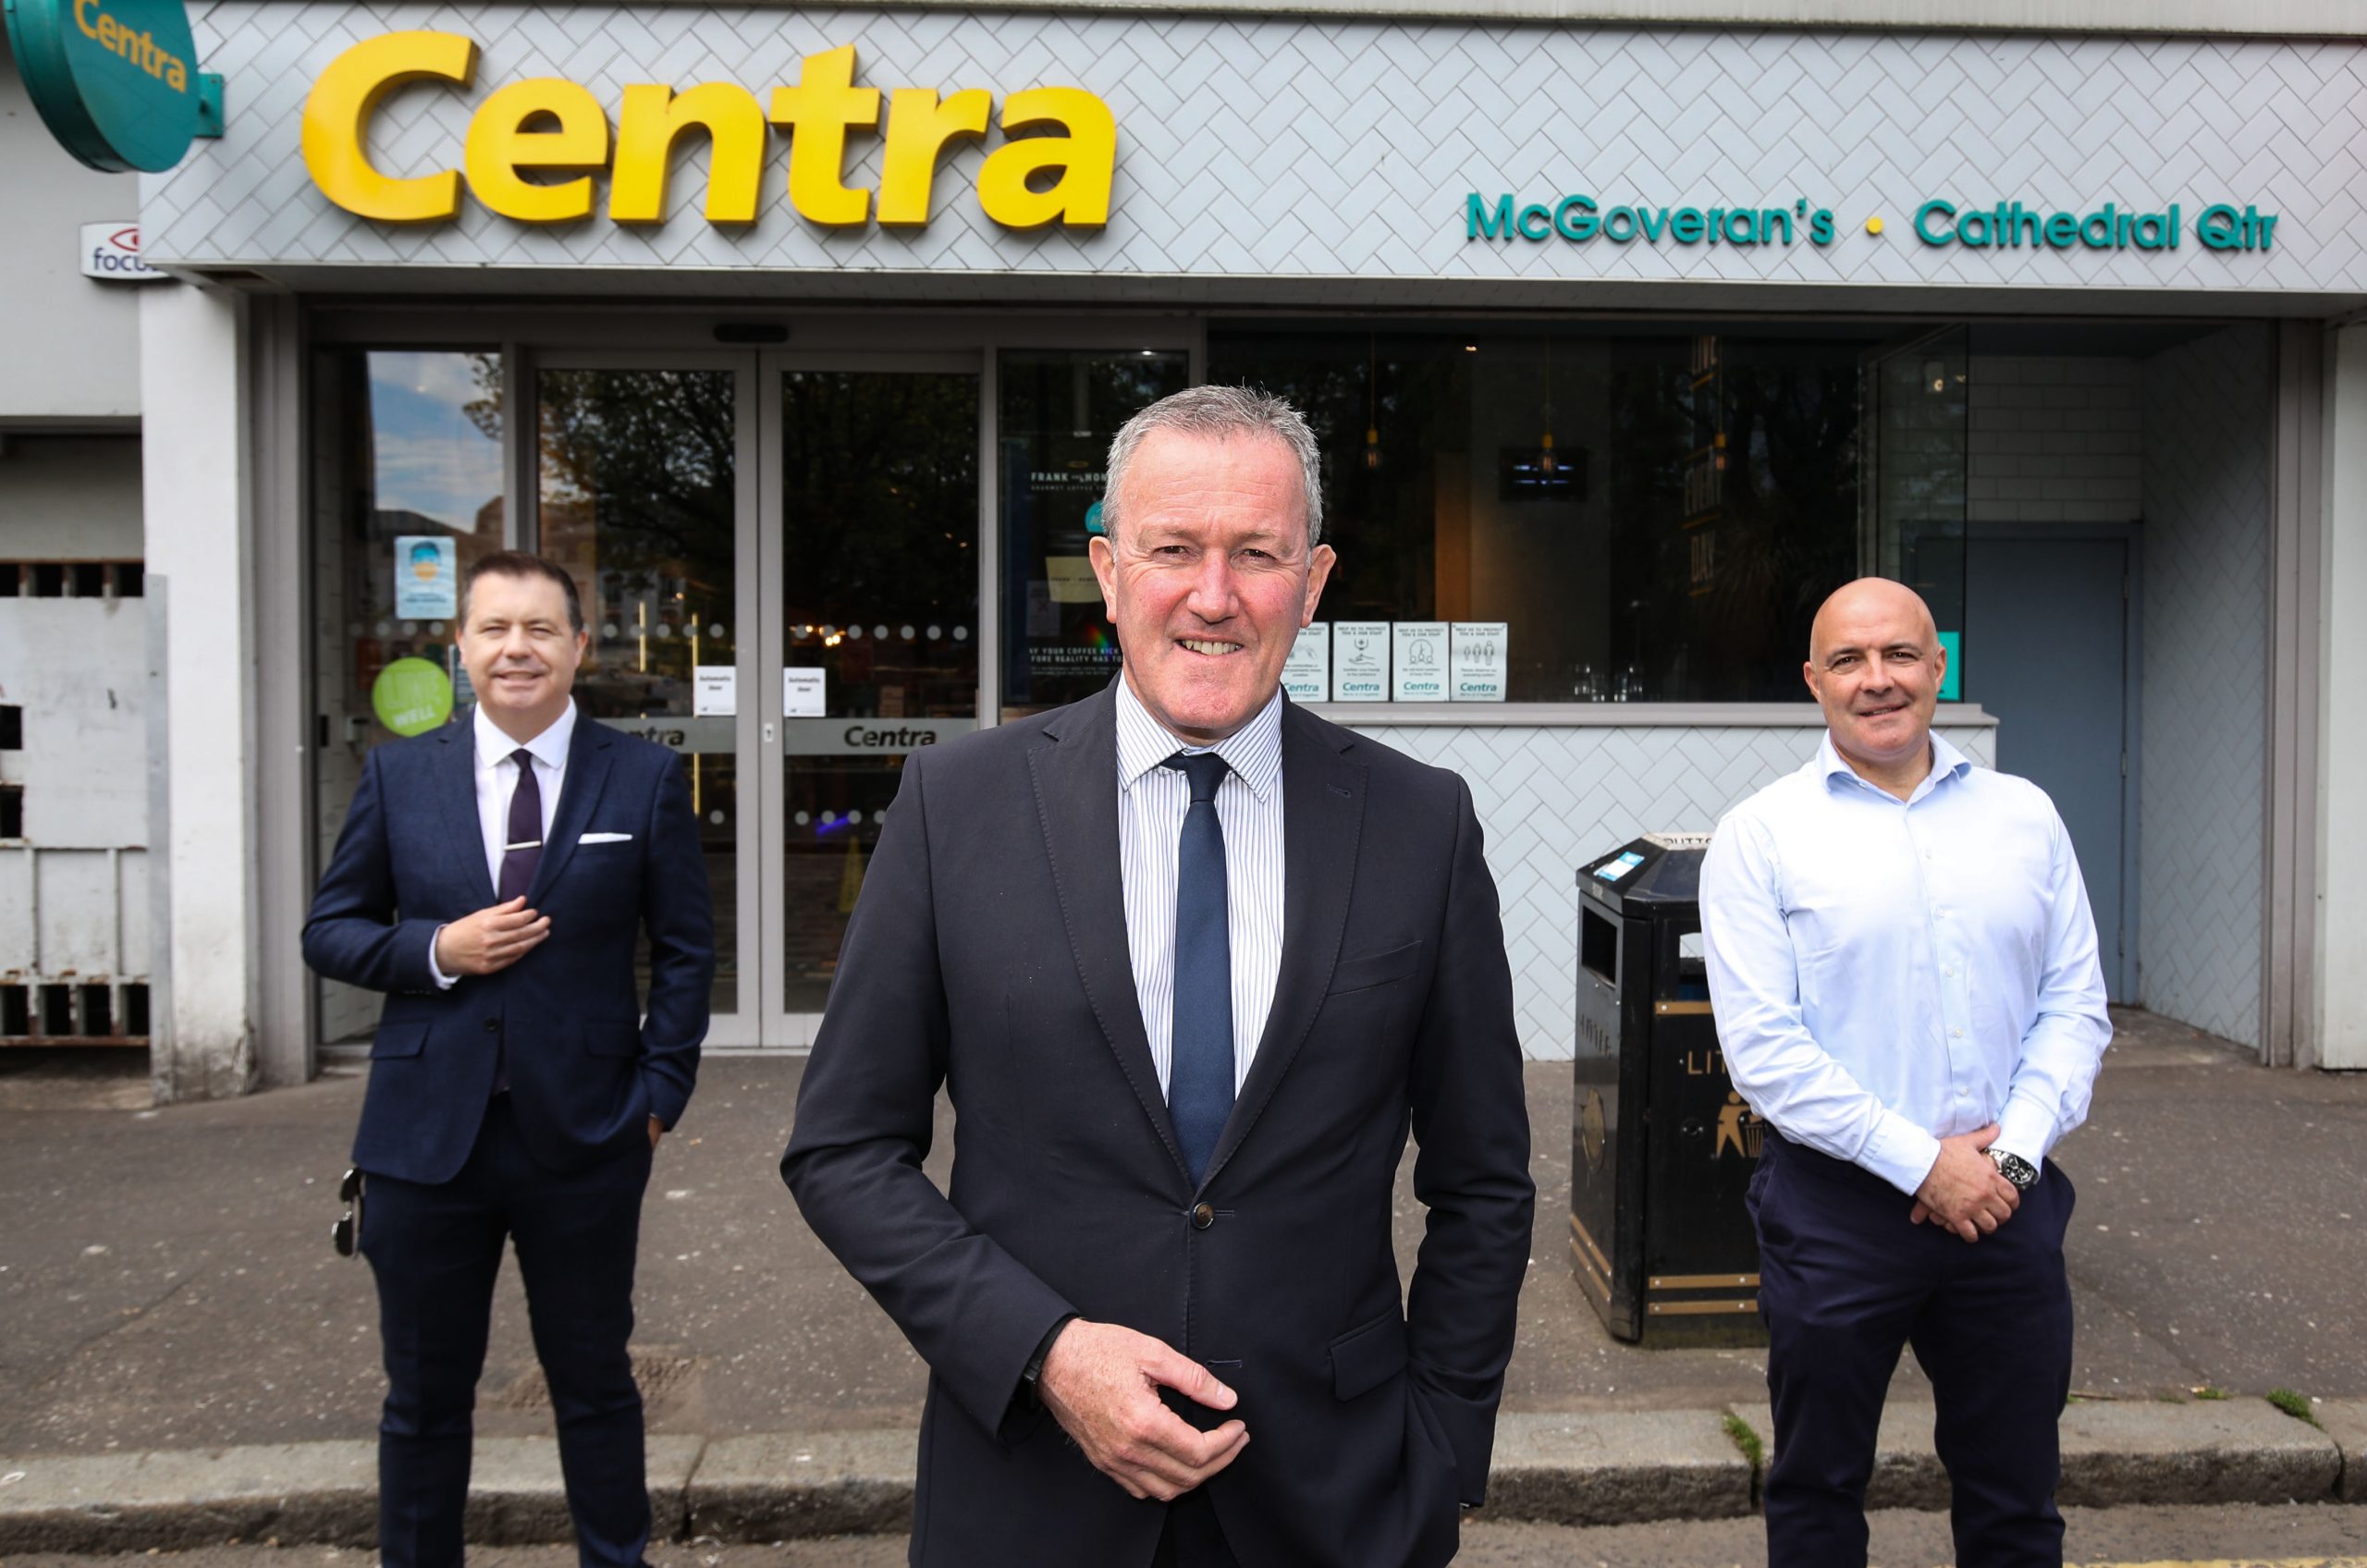 Sawers and McGoveran’s Centra – just two businesses in line for support